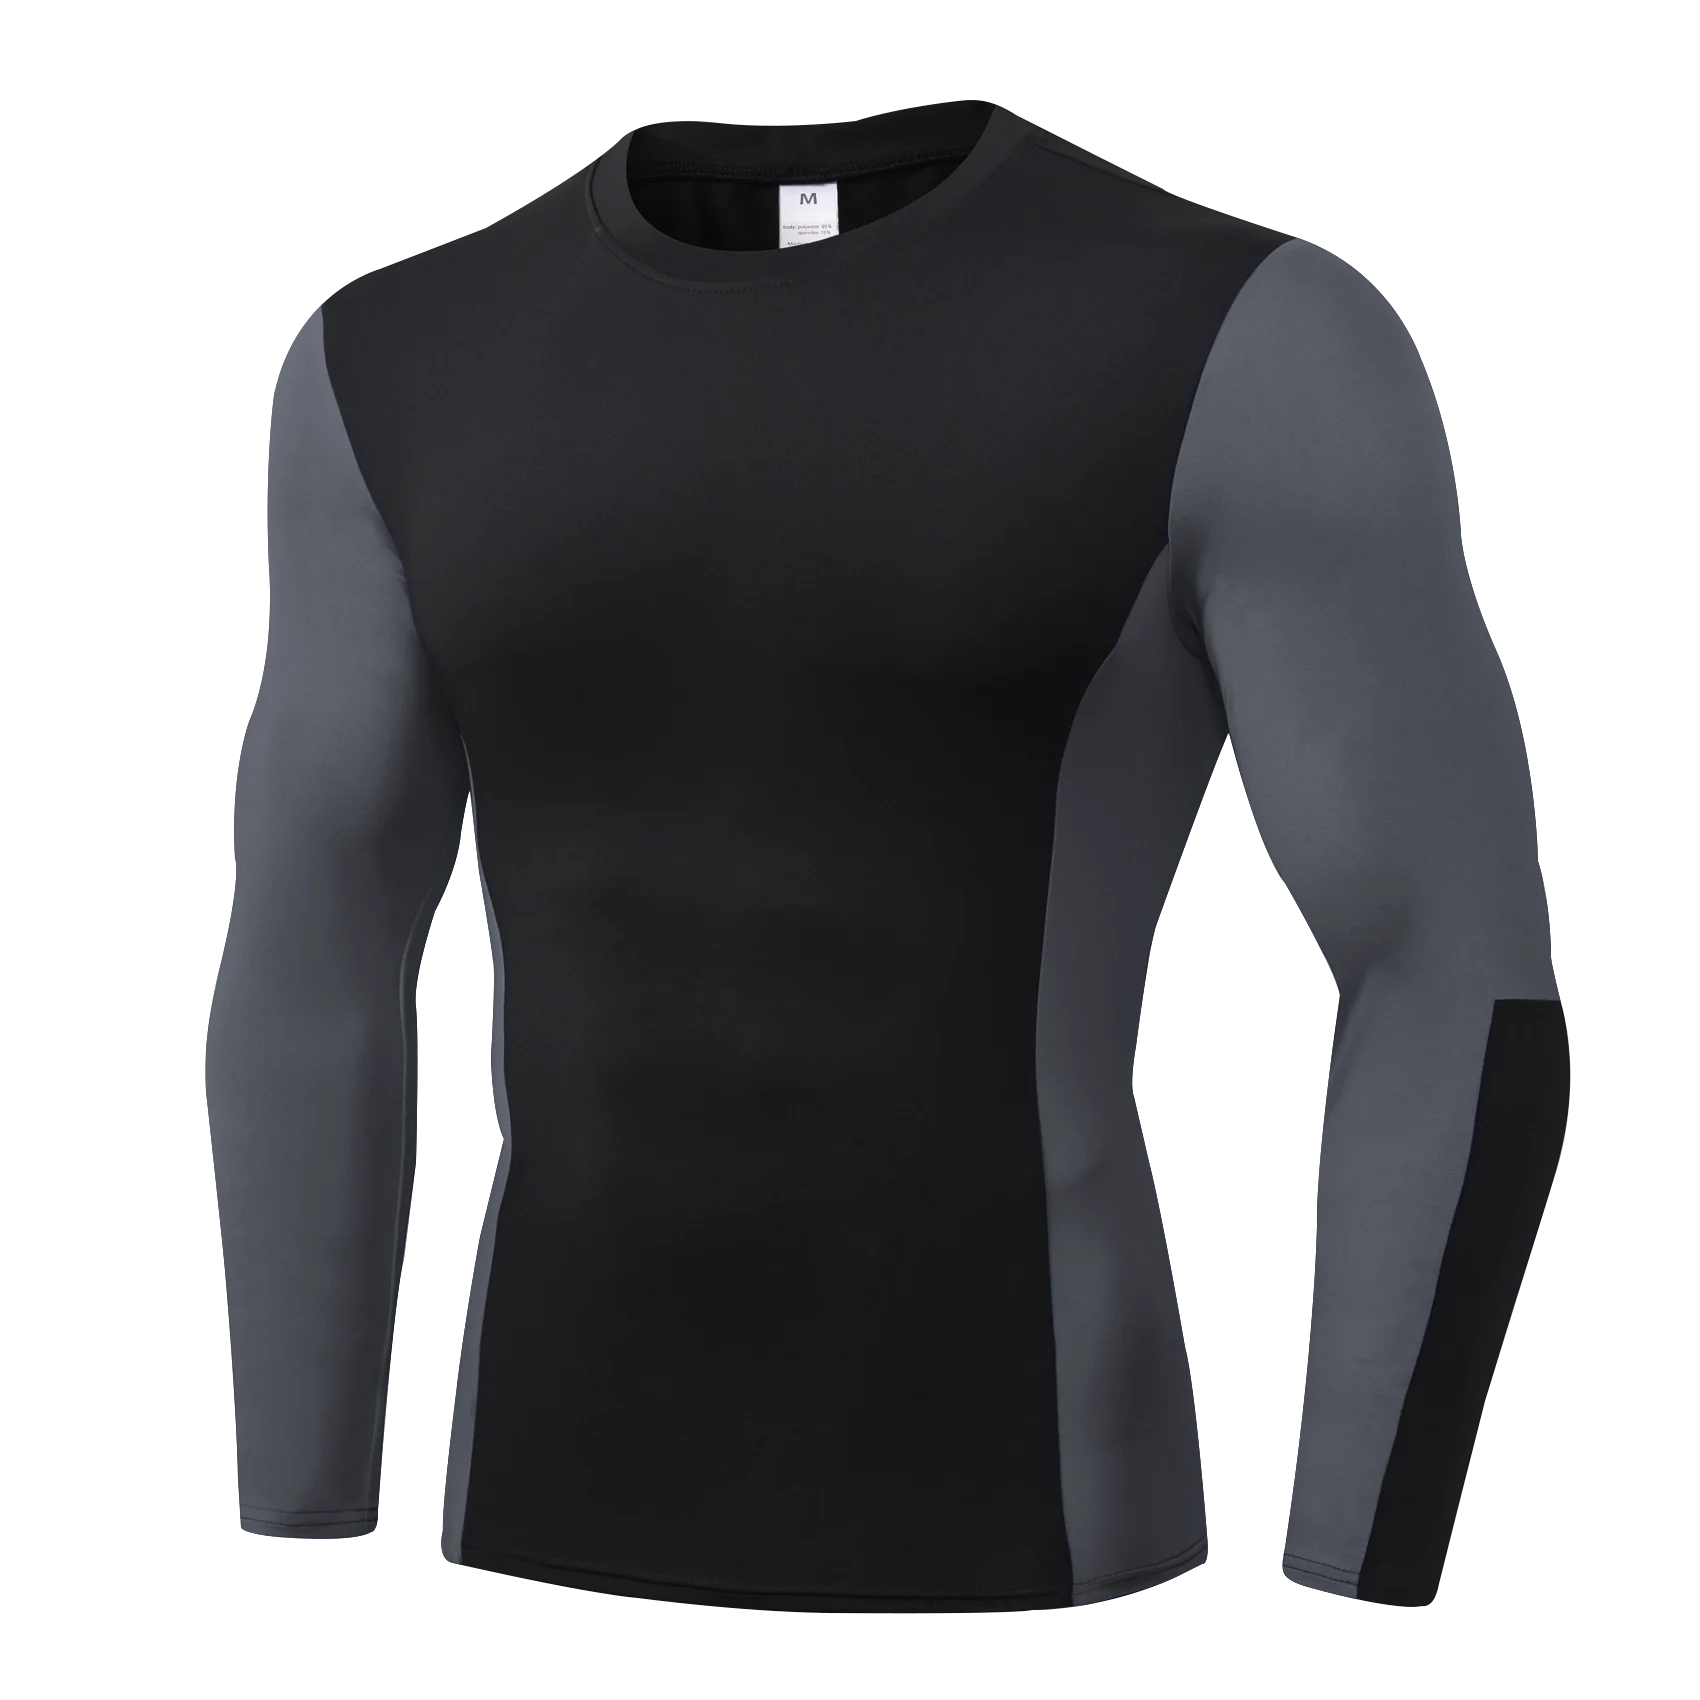 Runhit Compression Shirts for Men Long Sleeve Cool Dry Athletic Workout Tee Shirts Fishing Sun Shirts Sports Thermal Tights 